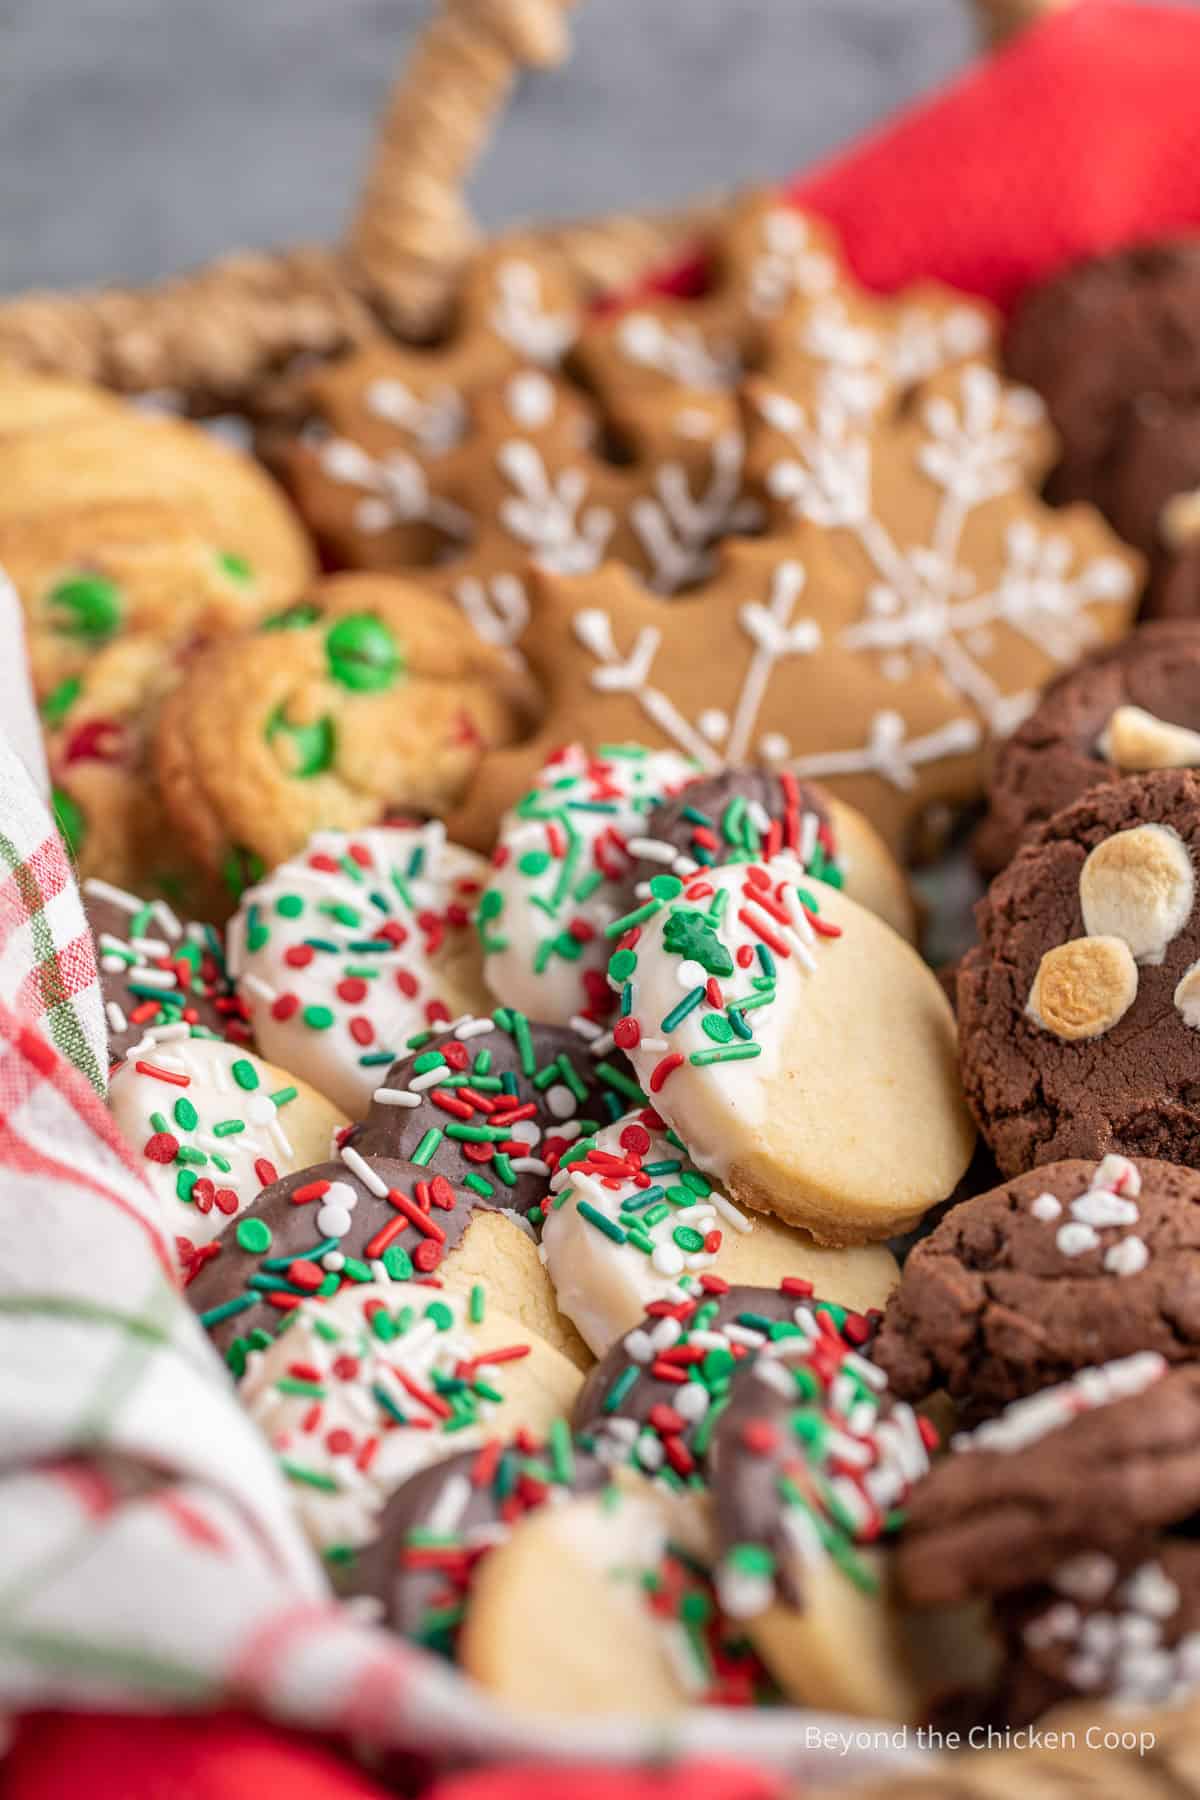 A basket filled with Christmas cookies.